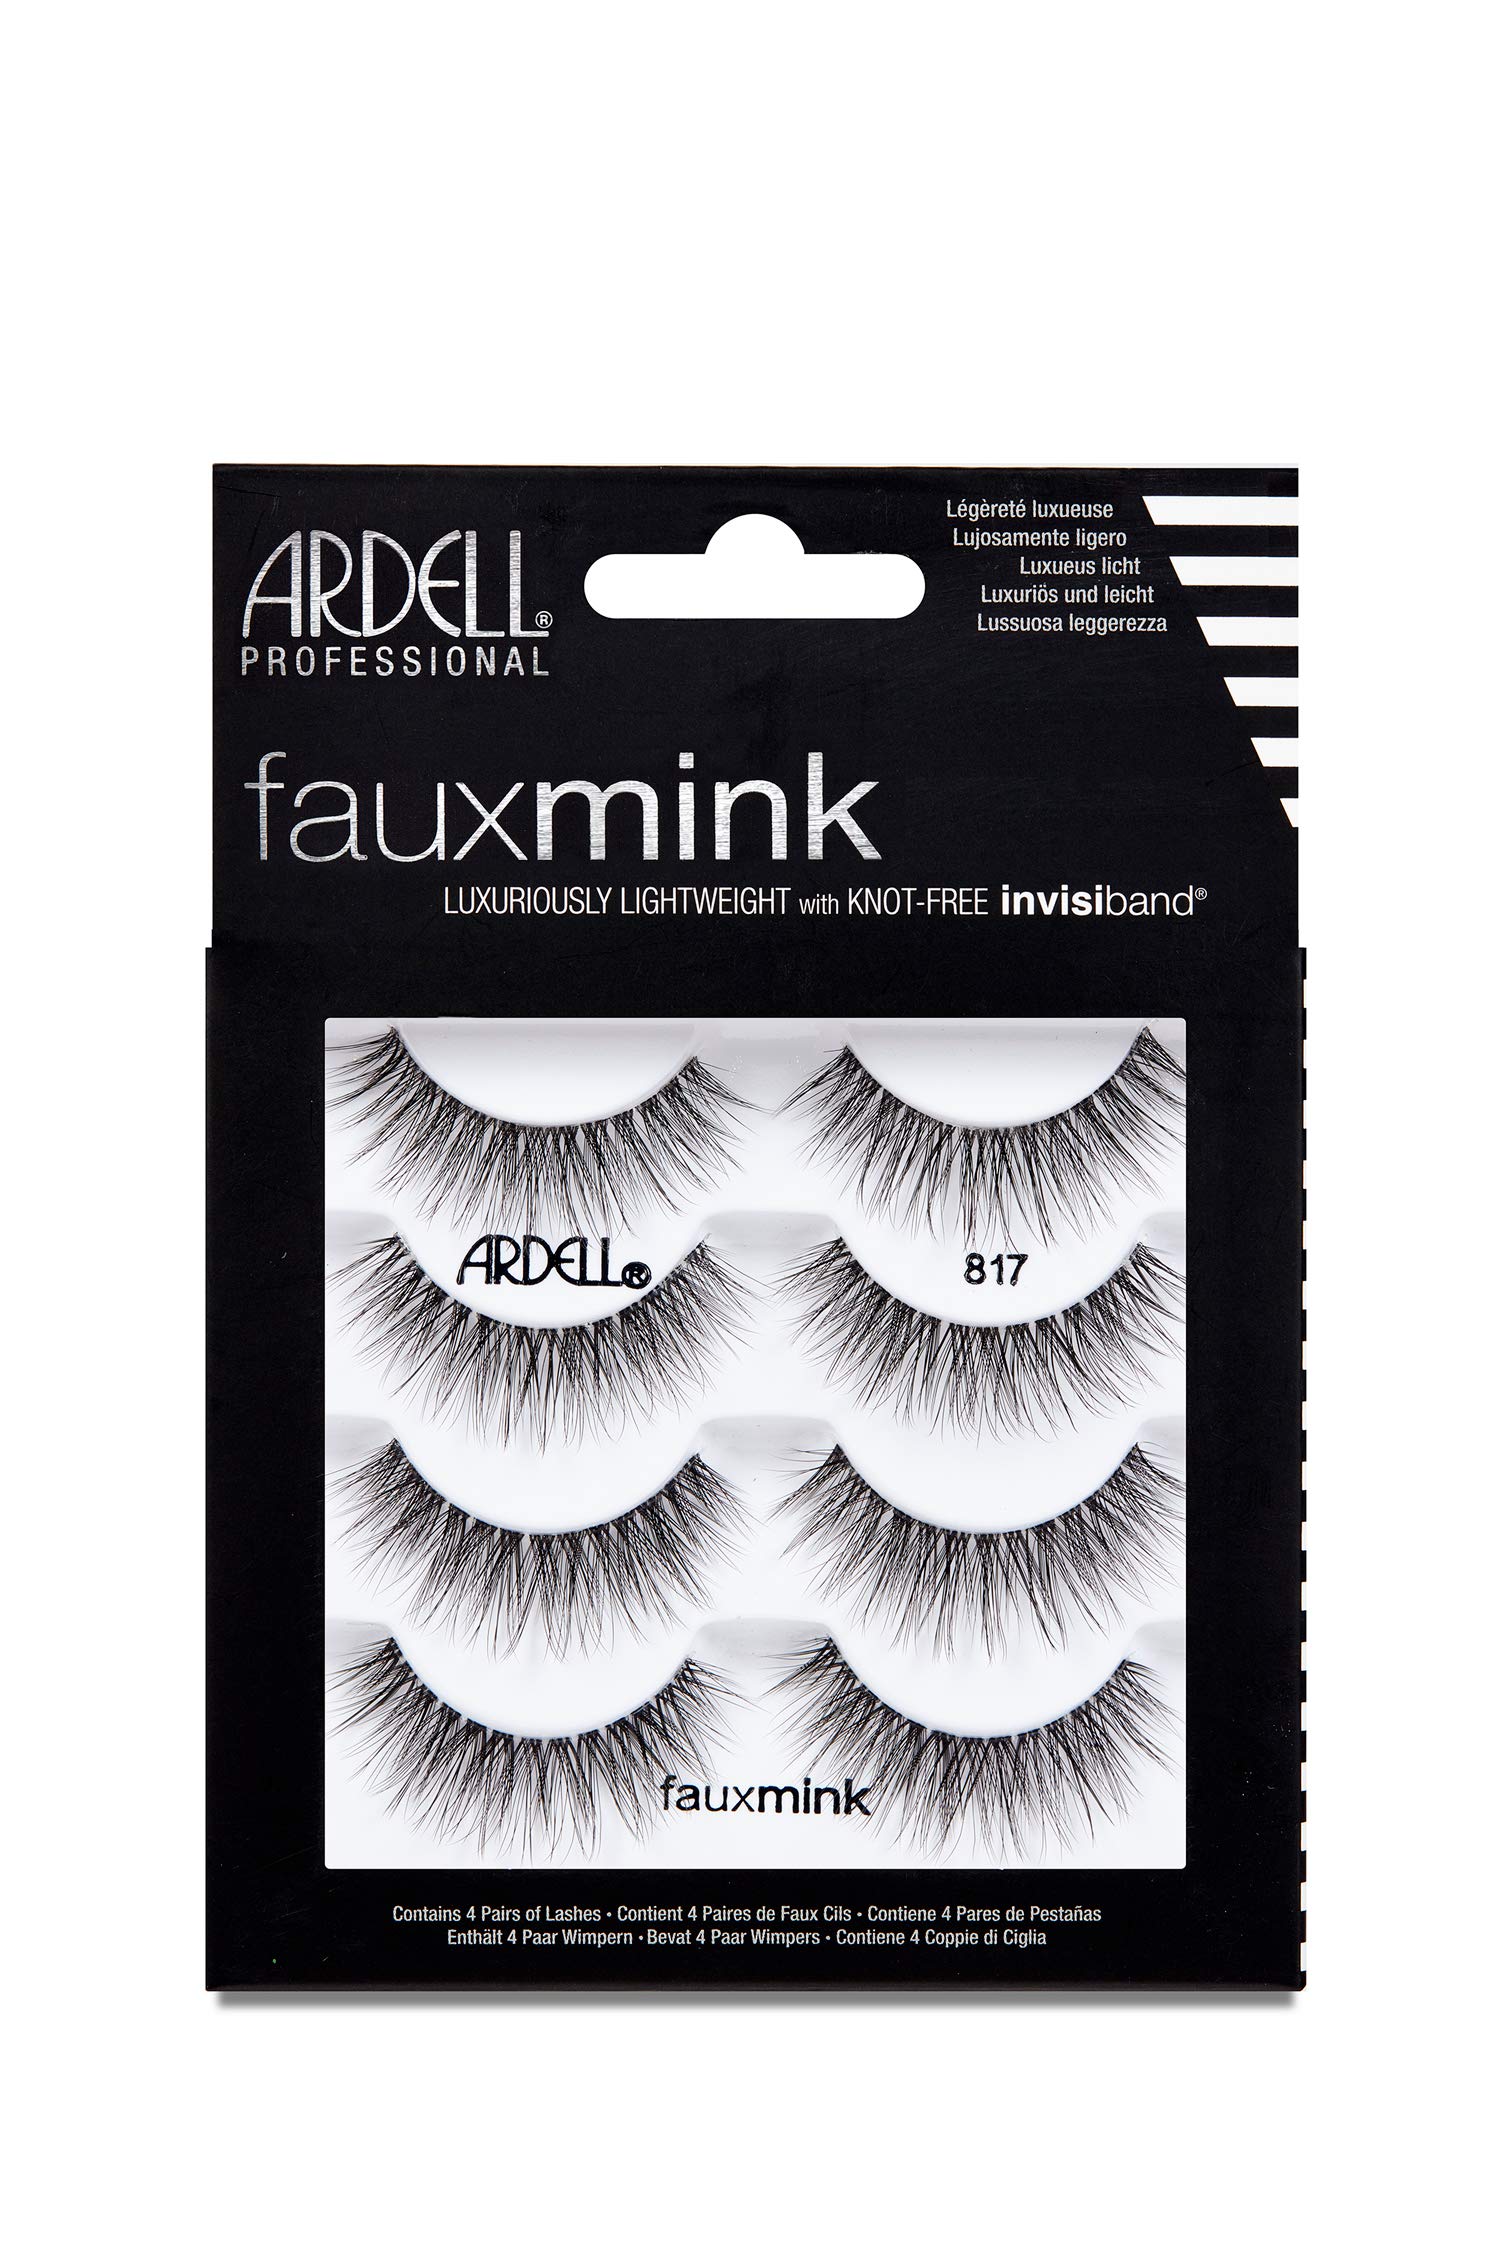 ARDELL Faux Mink Wimpern, 817 4 Pack, 25 g